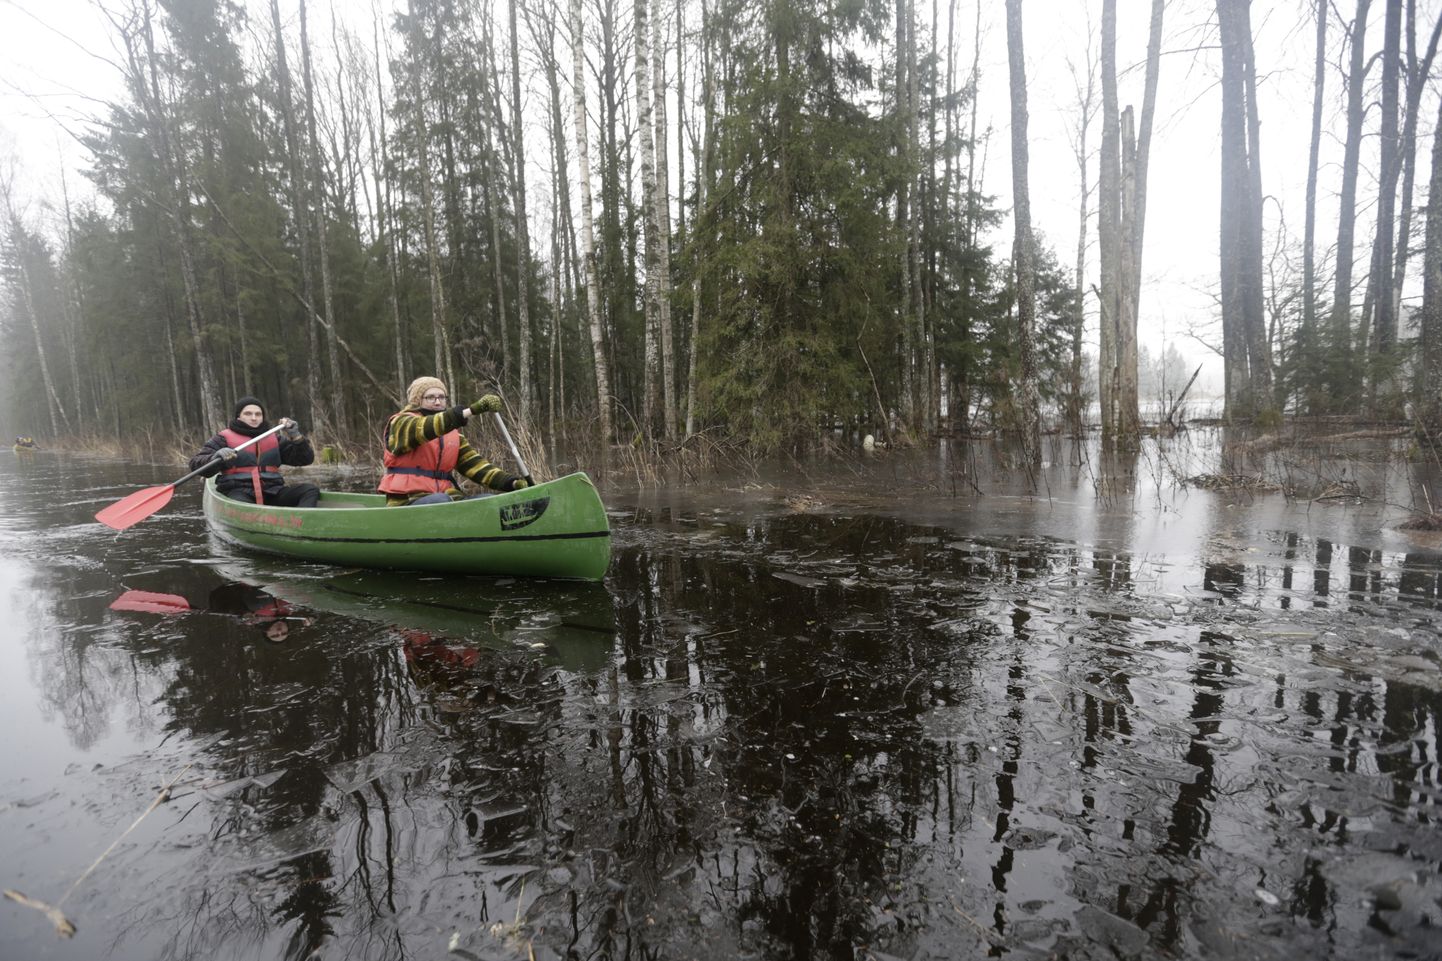 People canoe through a flooded forest in Soomaa national park, Estonia, February 7, 2016. In this Estonian region hit by floods every spring the natural disaster is used to attract visitors and organise canoe tours through flooded territories. The floods are called Fifth Season by local people. REUTERS/Ints Kalnins